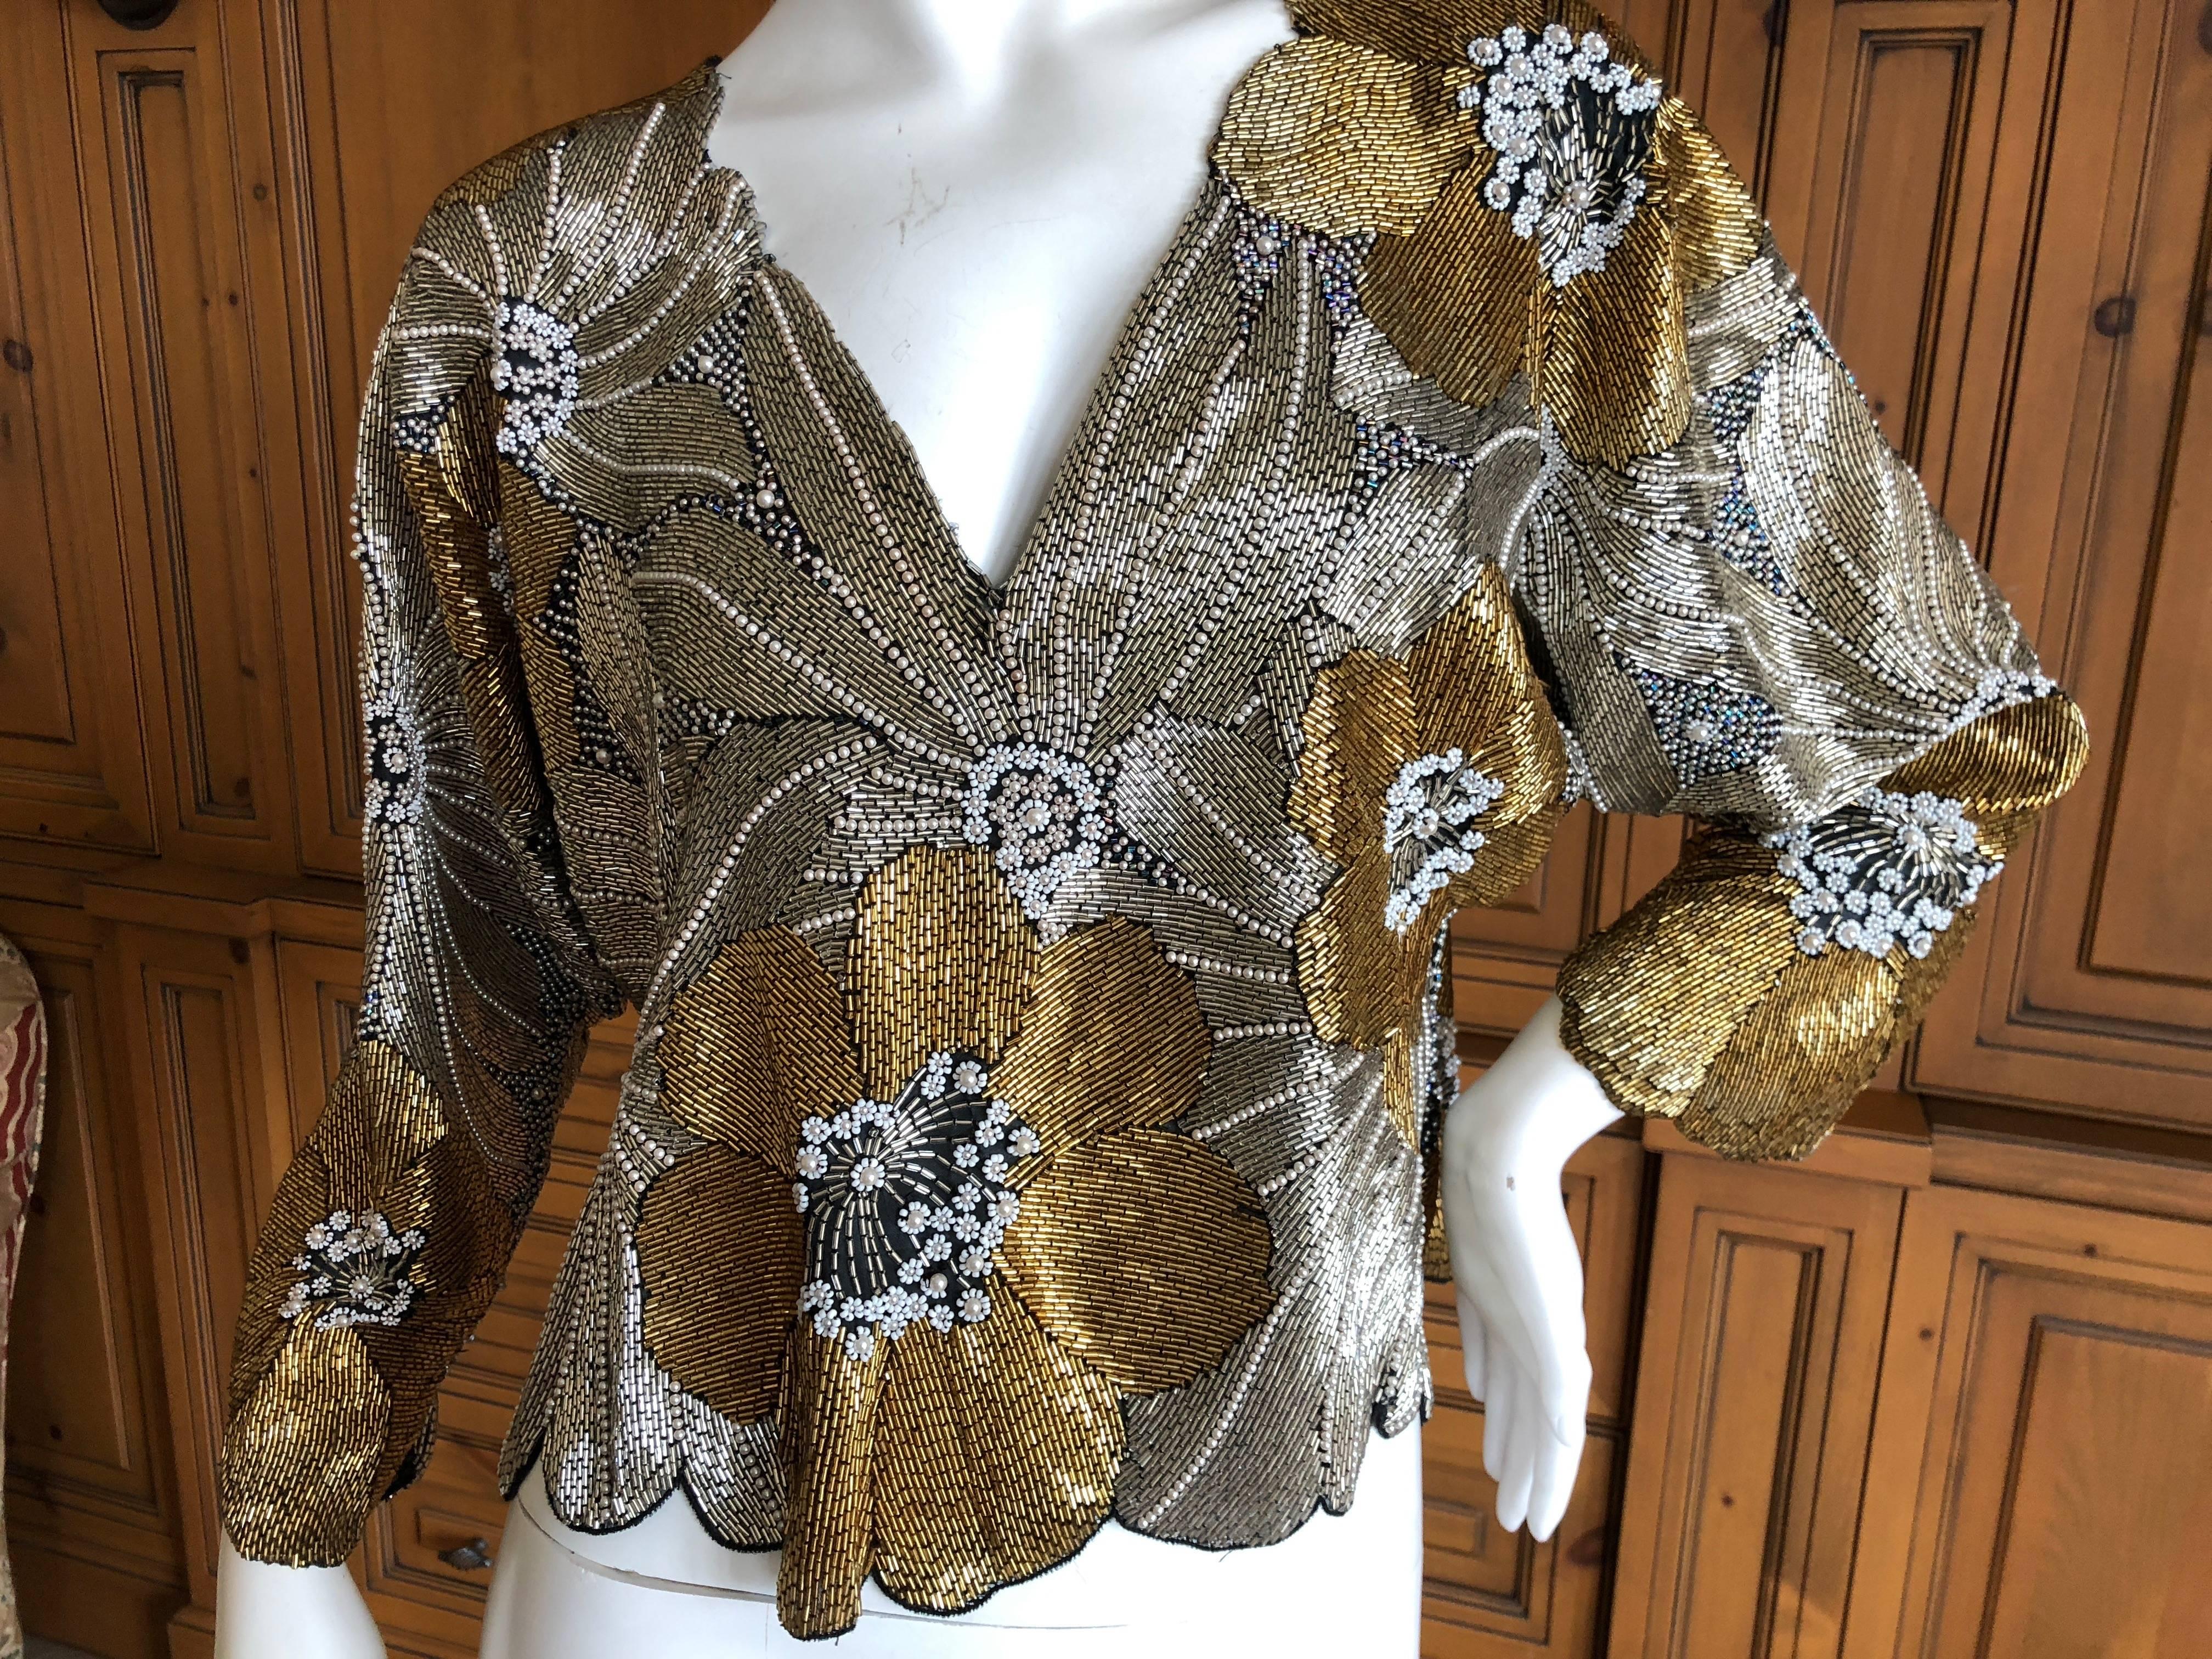 Halston 1970's Disco Era Gold Bugle Bead and Pearl Embellished Top In Good Condition For Sale In Cloverdale, CA